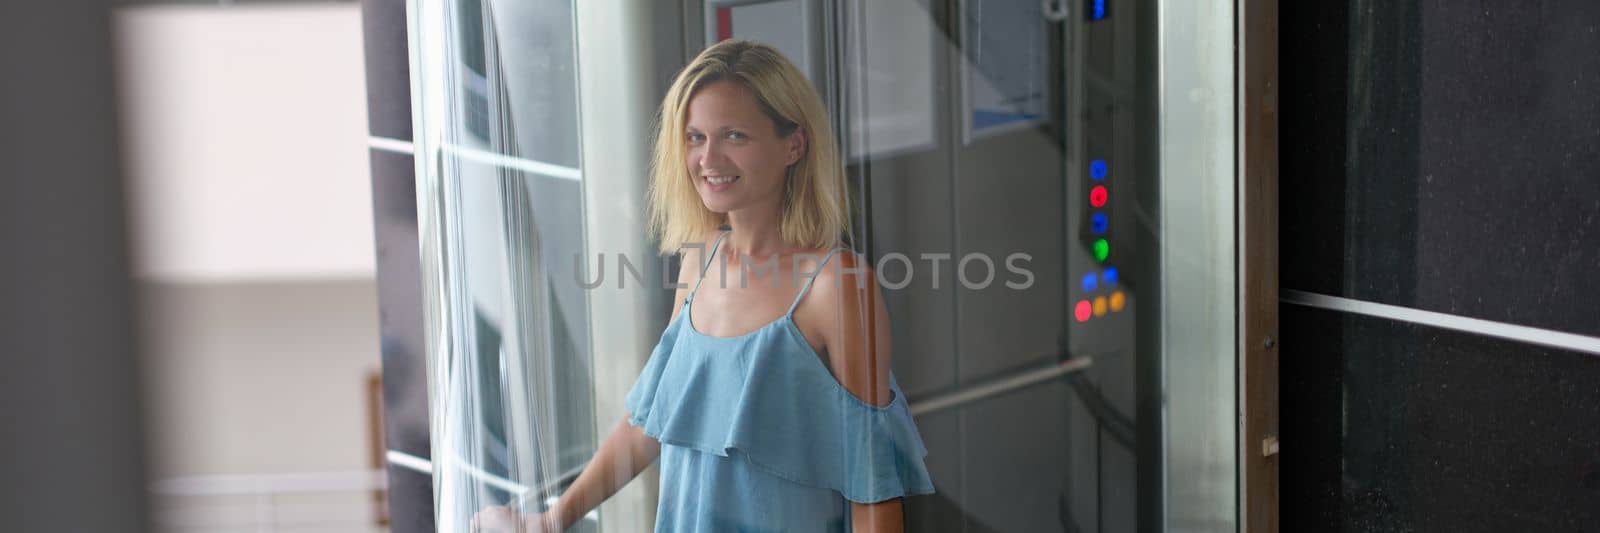 Beautiful smiling woman in transparent glass elevator by kuprevich